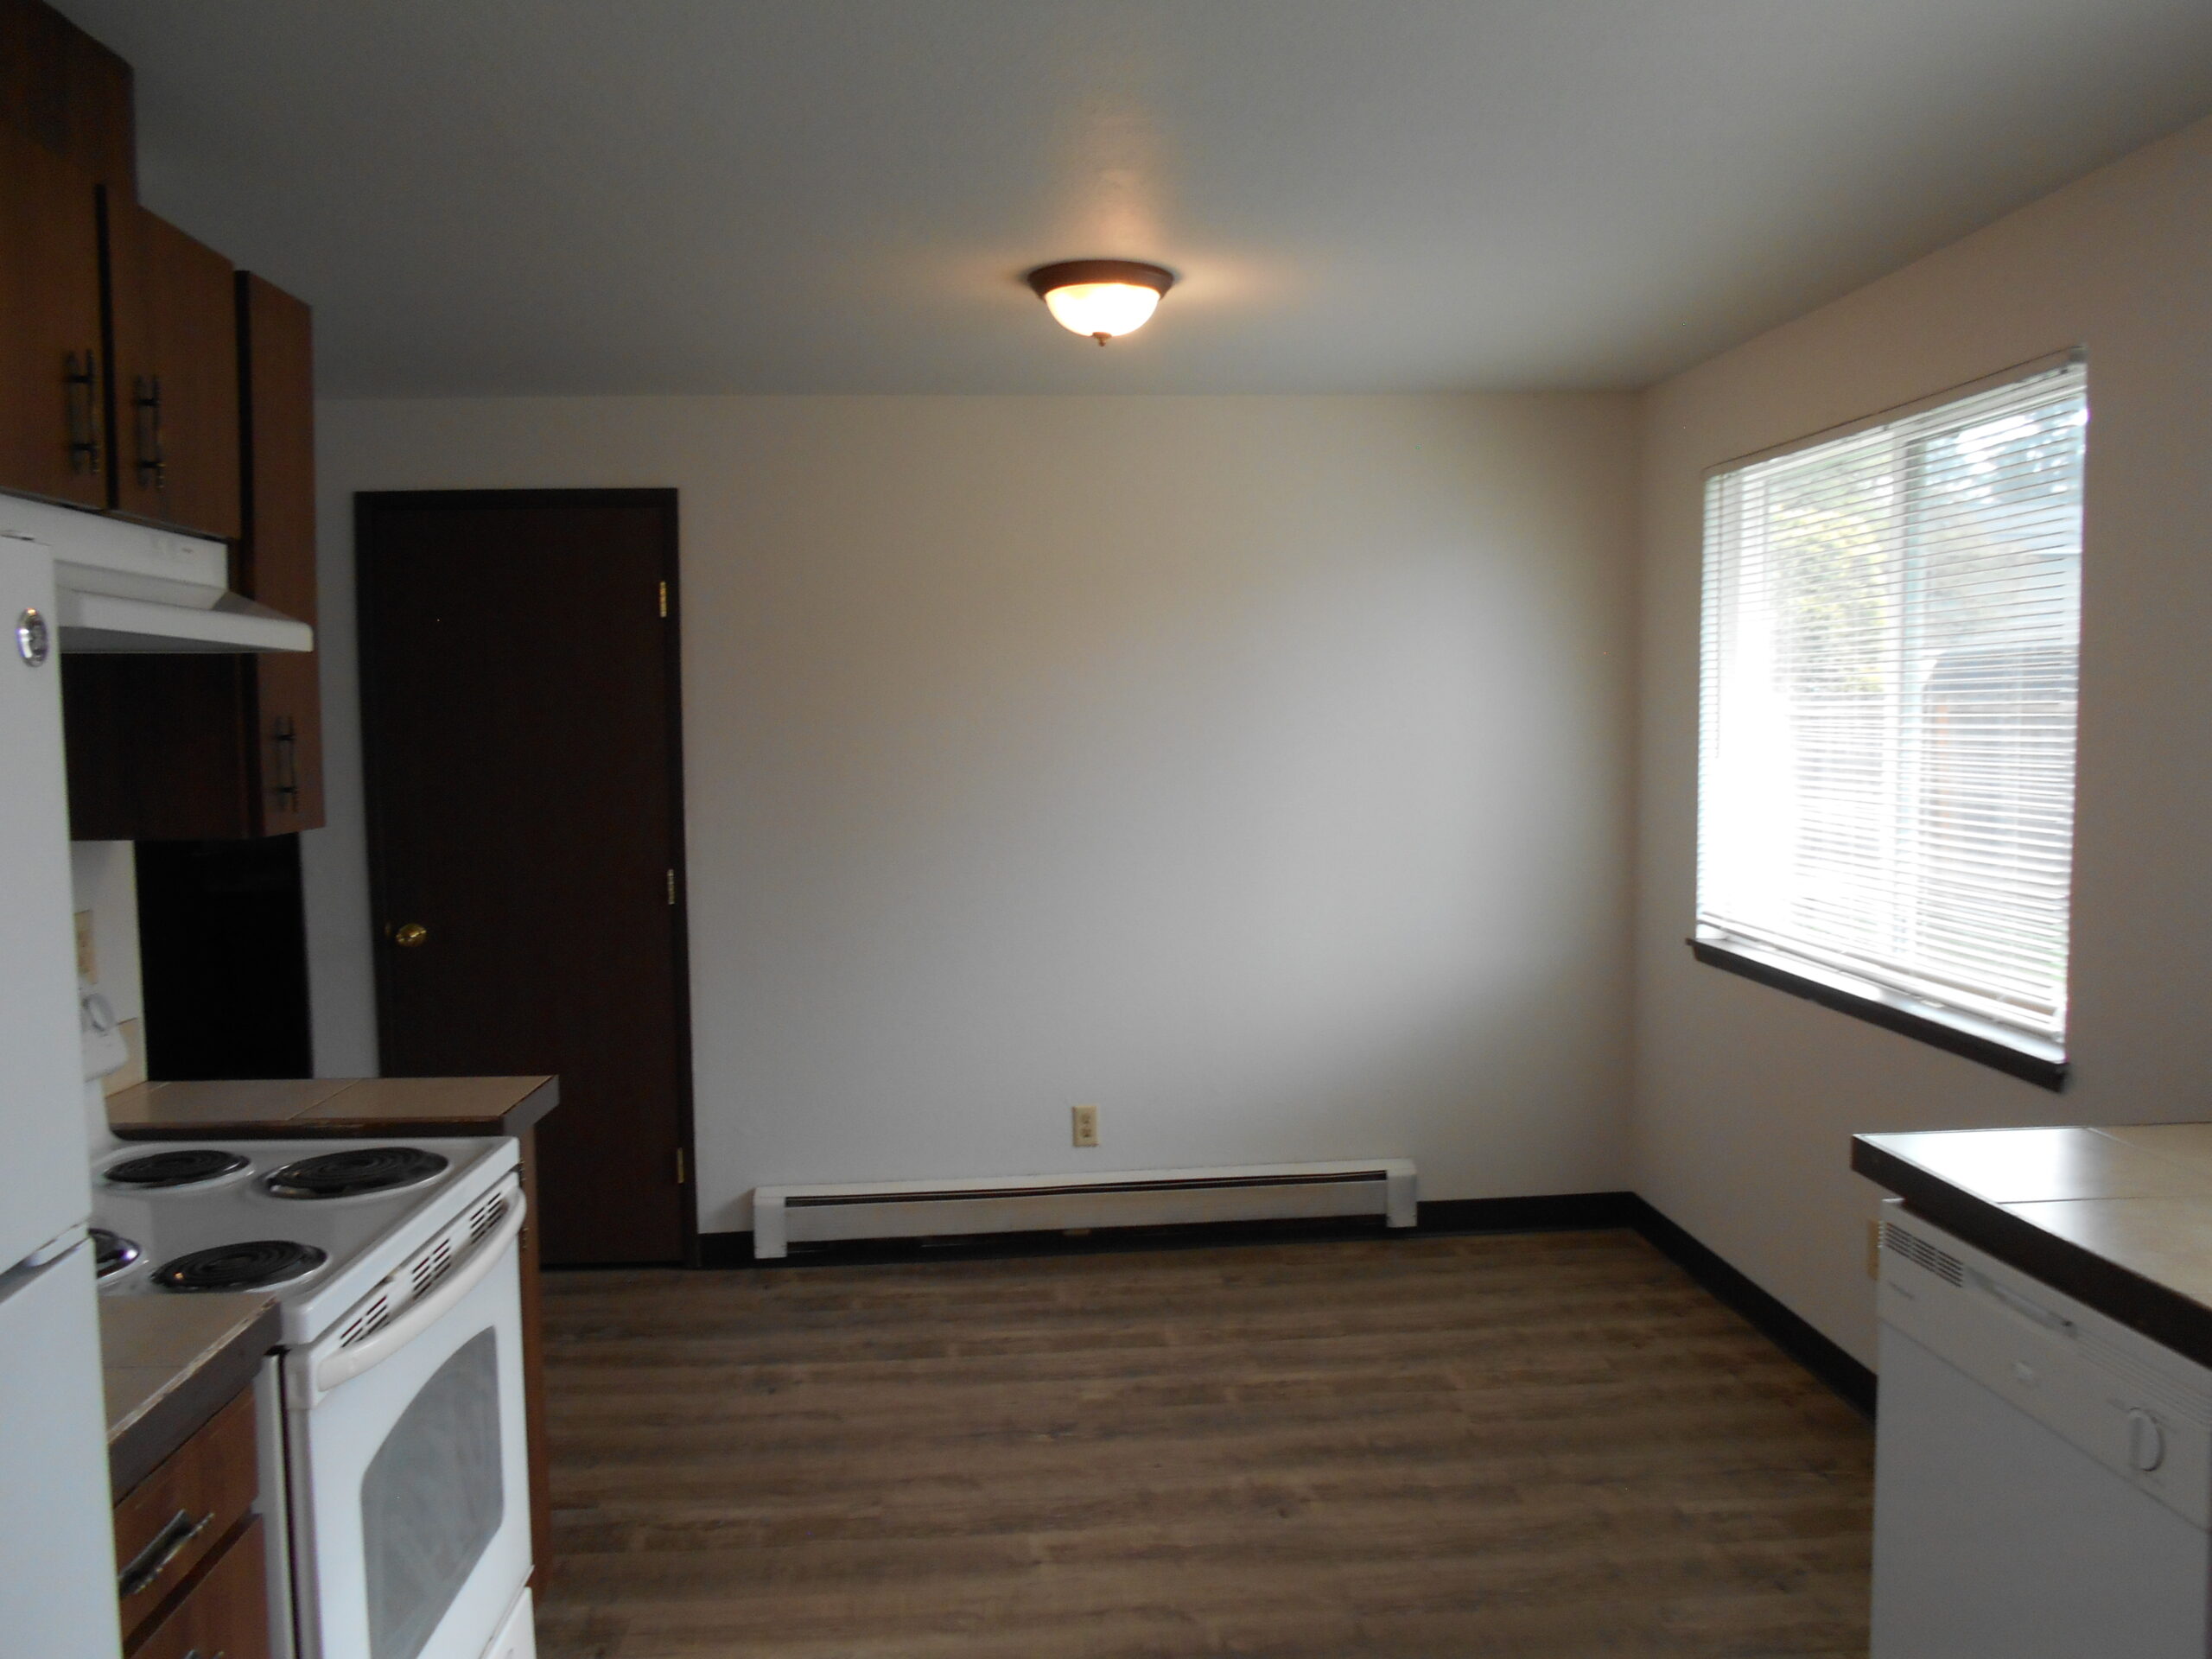 $1,599 – 2 Bdrm Duplex in Parkland with MOVE IN SPECIAL!!!